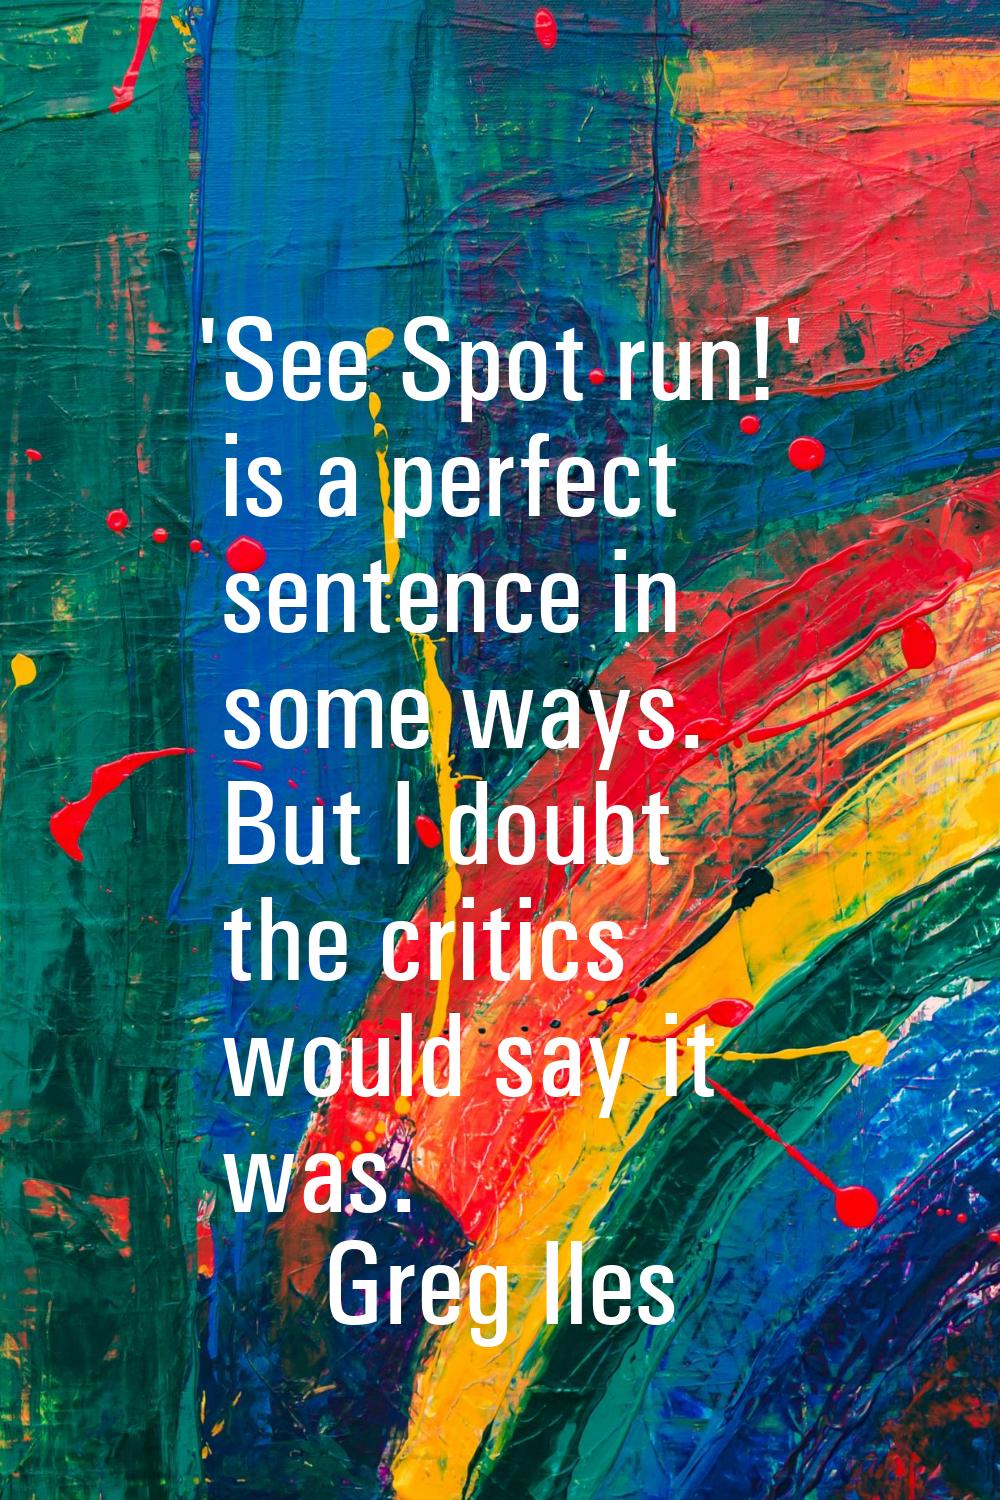 'See Spot run!' is a perfect sentence in some ways. But I doubt the critics would say it was.